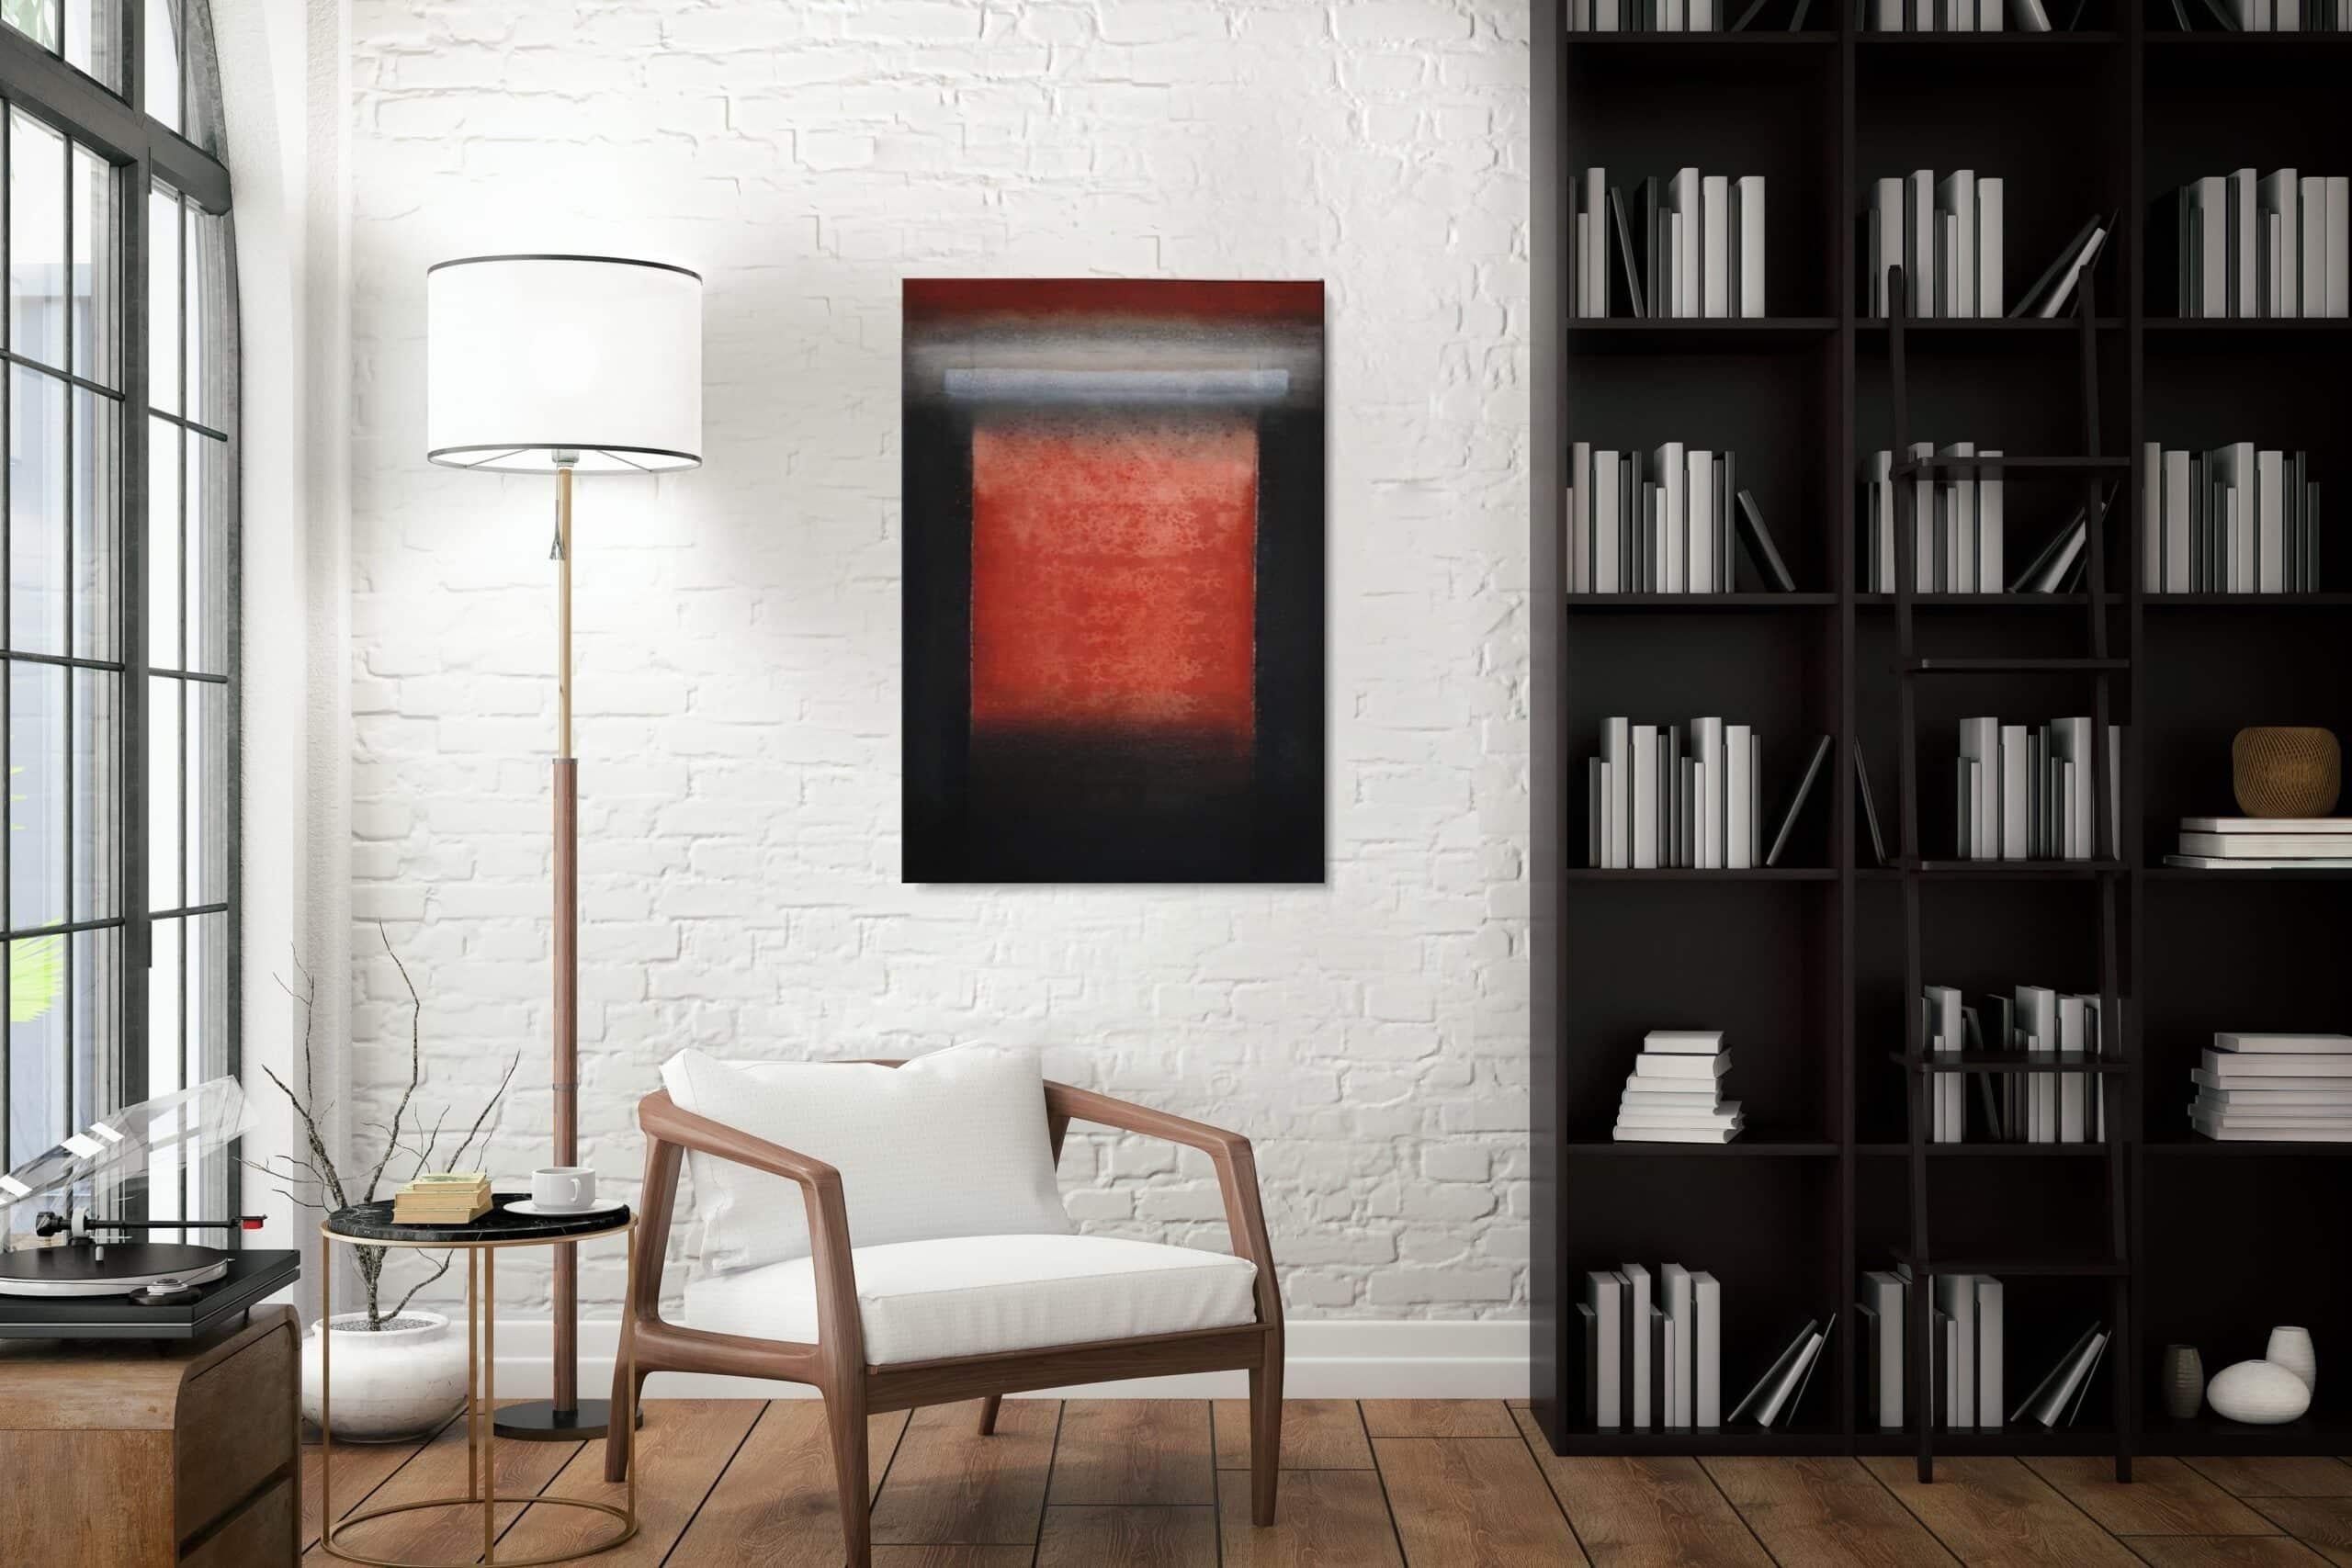 Untitled VII by Ferle - Abstract painting, lines, red and black tones, spiritual - Painting by Elvire Ferle